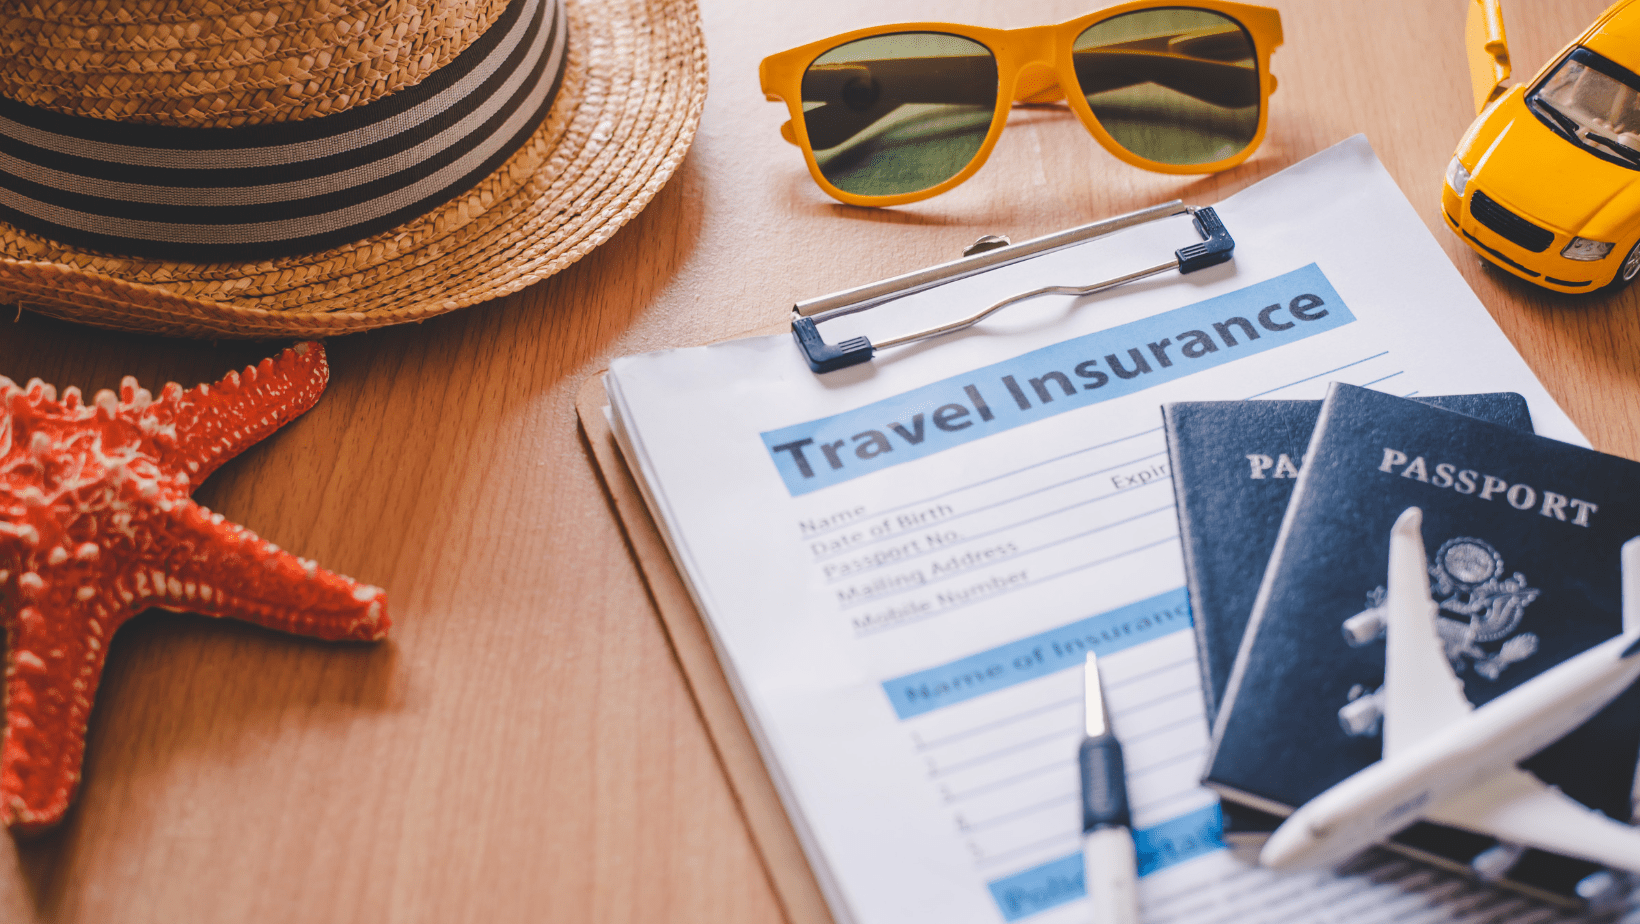 6 Tips to Choose the Right Travel Insurance for Your Next Adventure